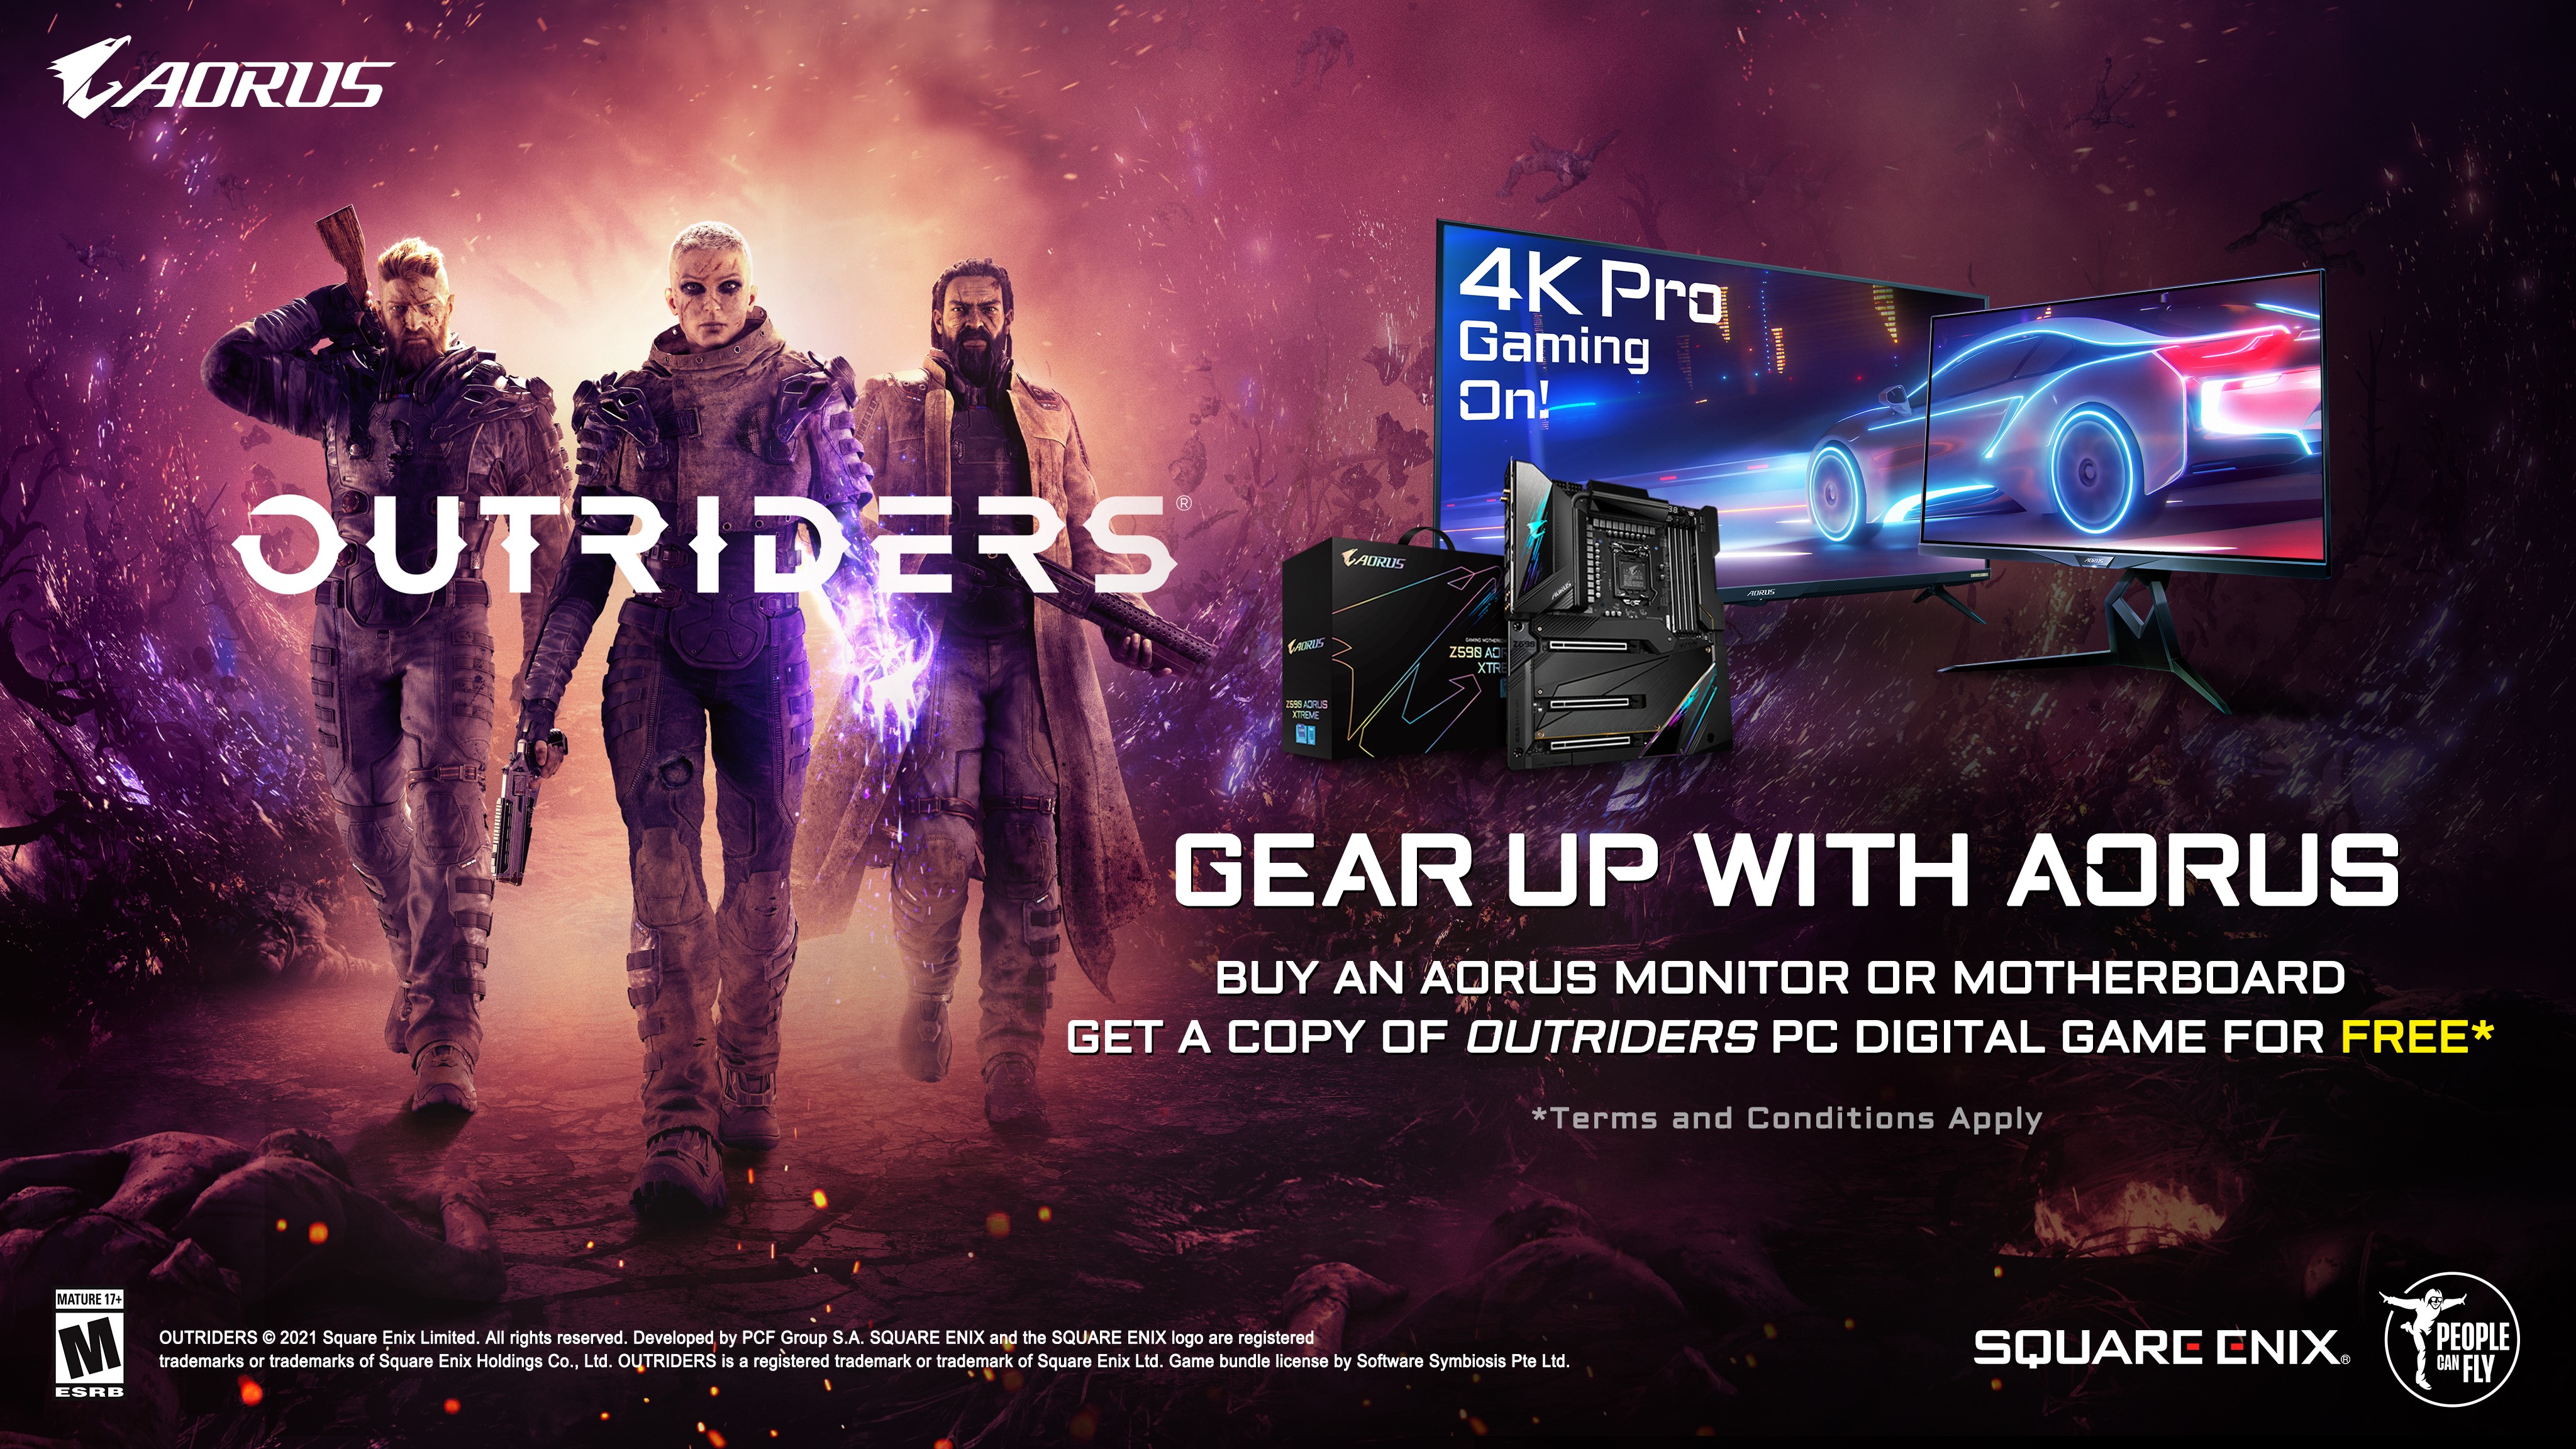 GIGABYTE Partners with SQUARE ENIX to Offer Outriders Game Bundle